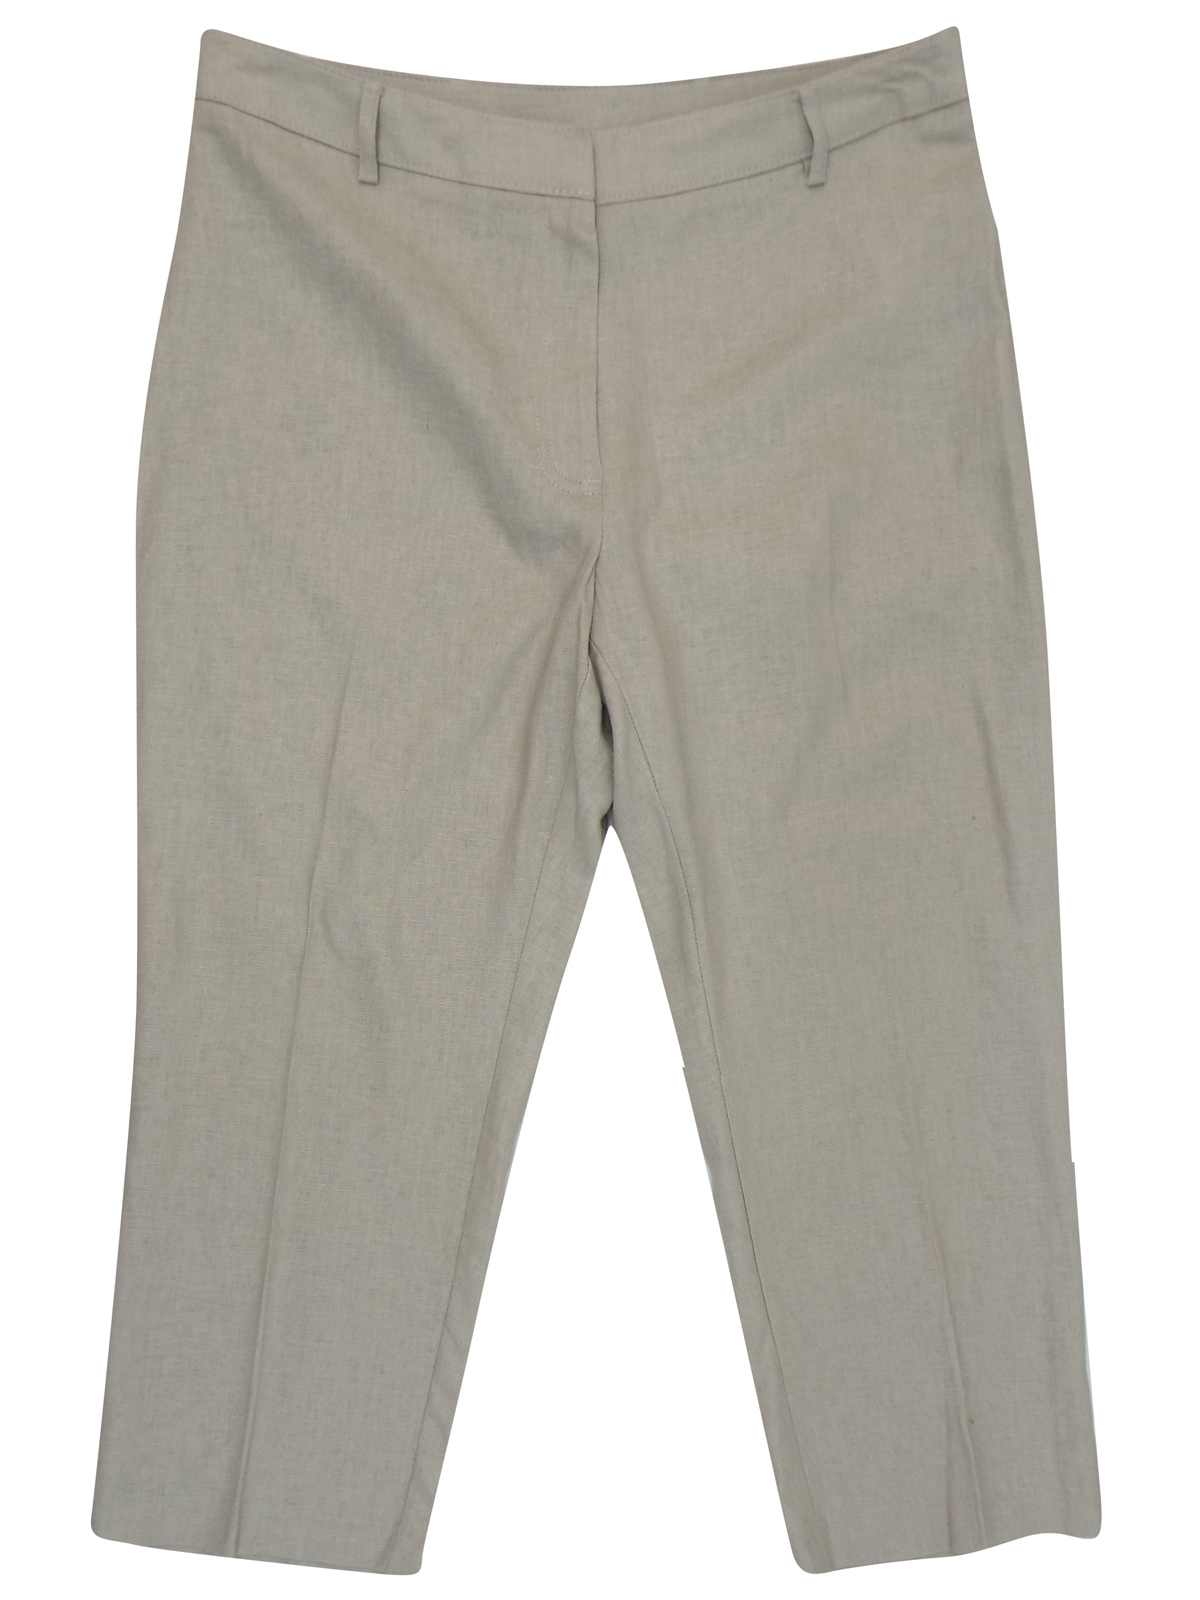 Marks and Spencer - - M&5 STONE Linen Blend Cropped Trousers - Size 12 ...